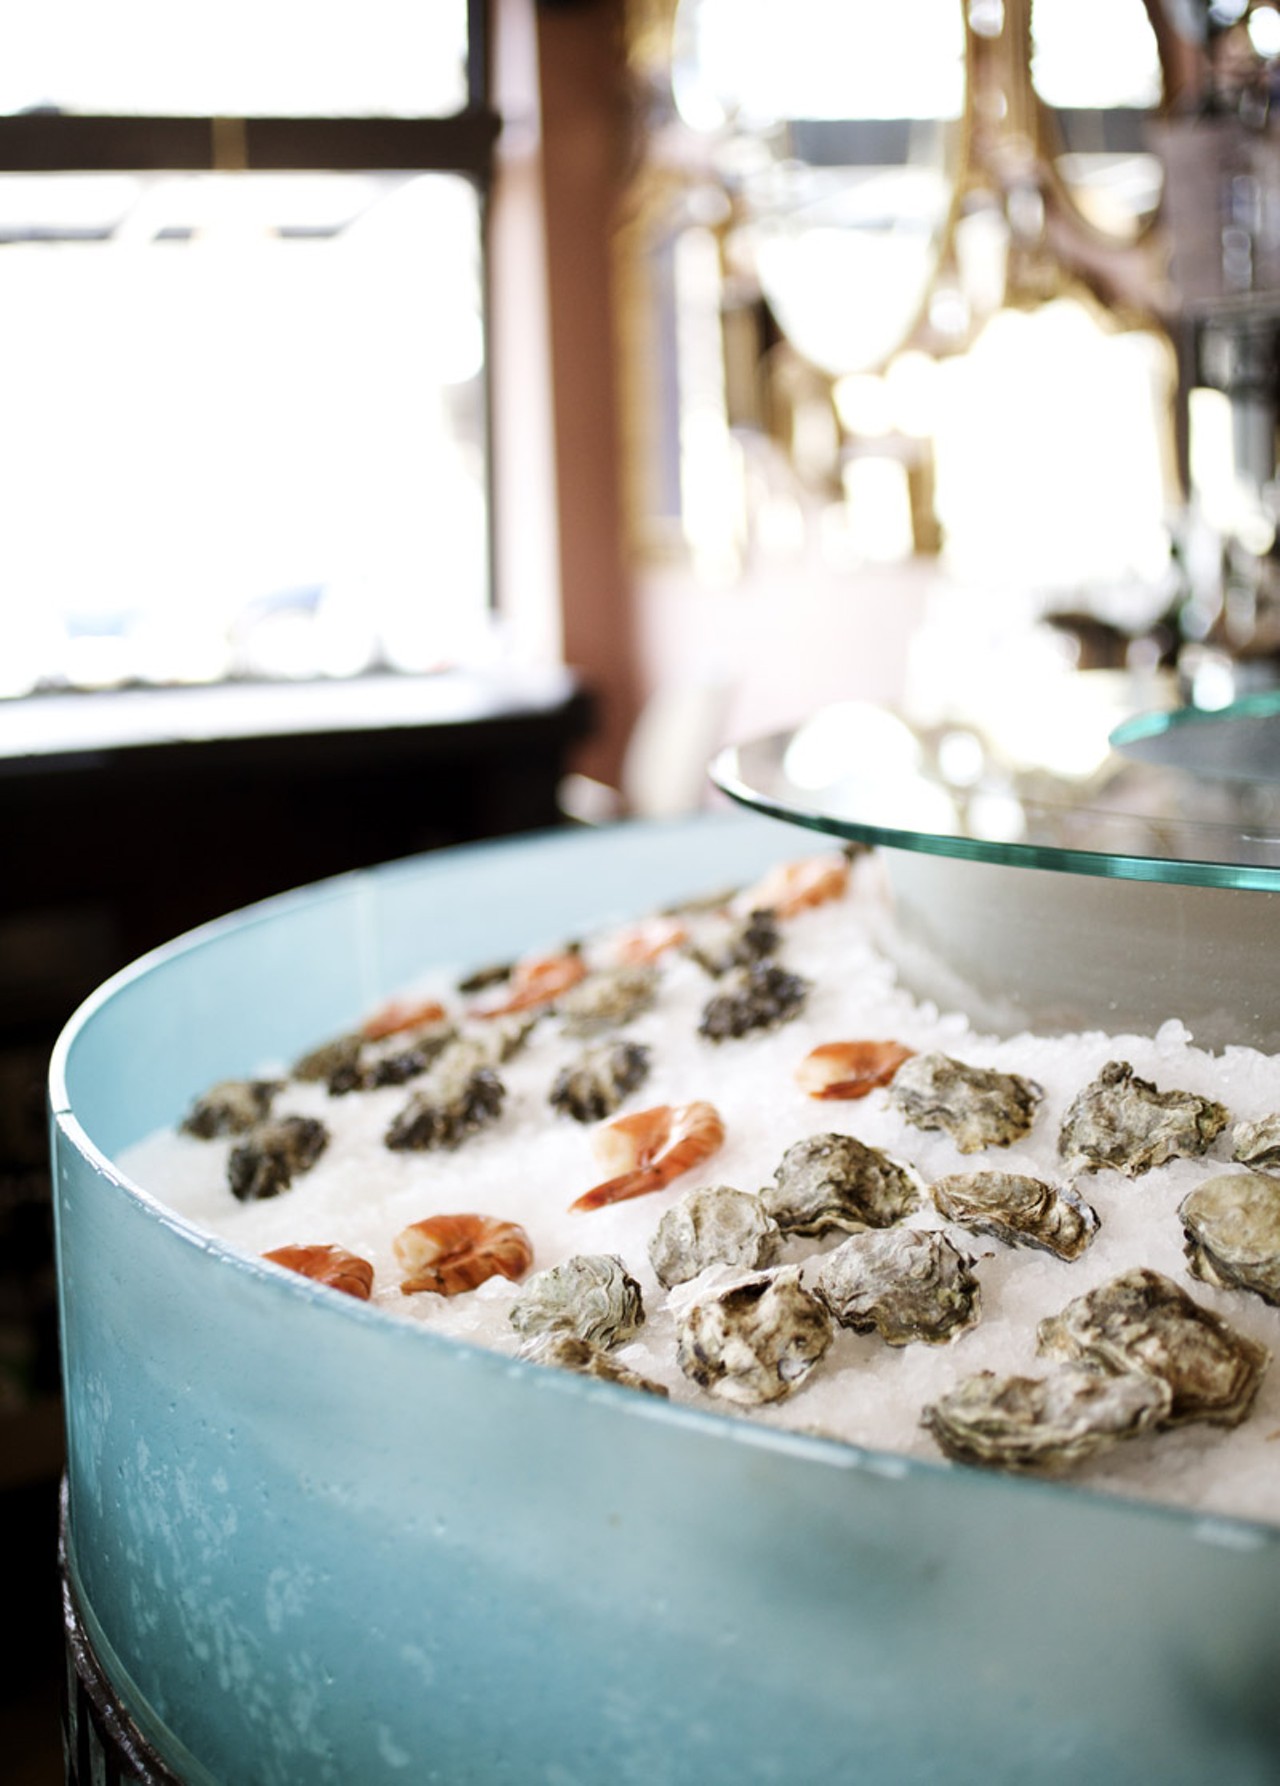 The oysters (and shrimp) at the shucking station, front and center behind the bar.